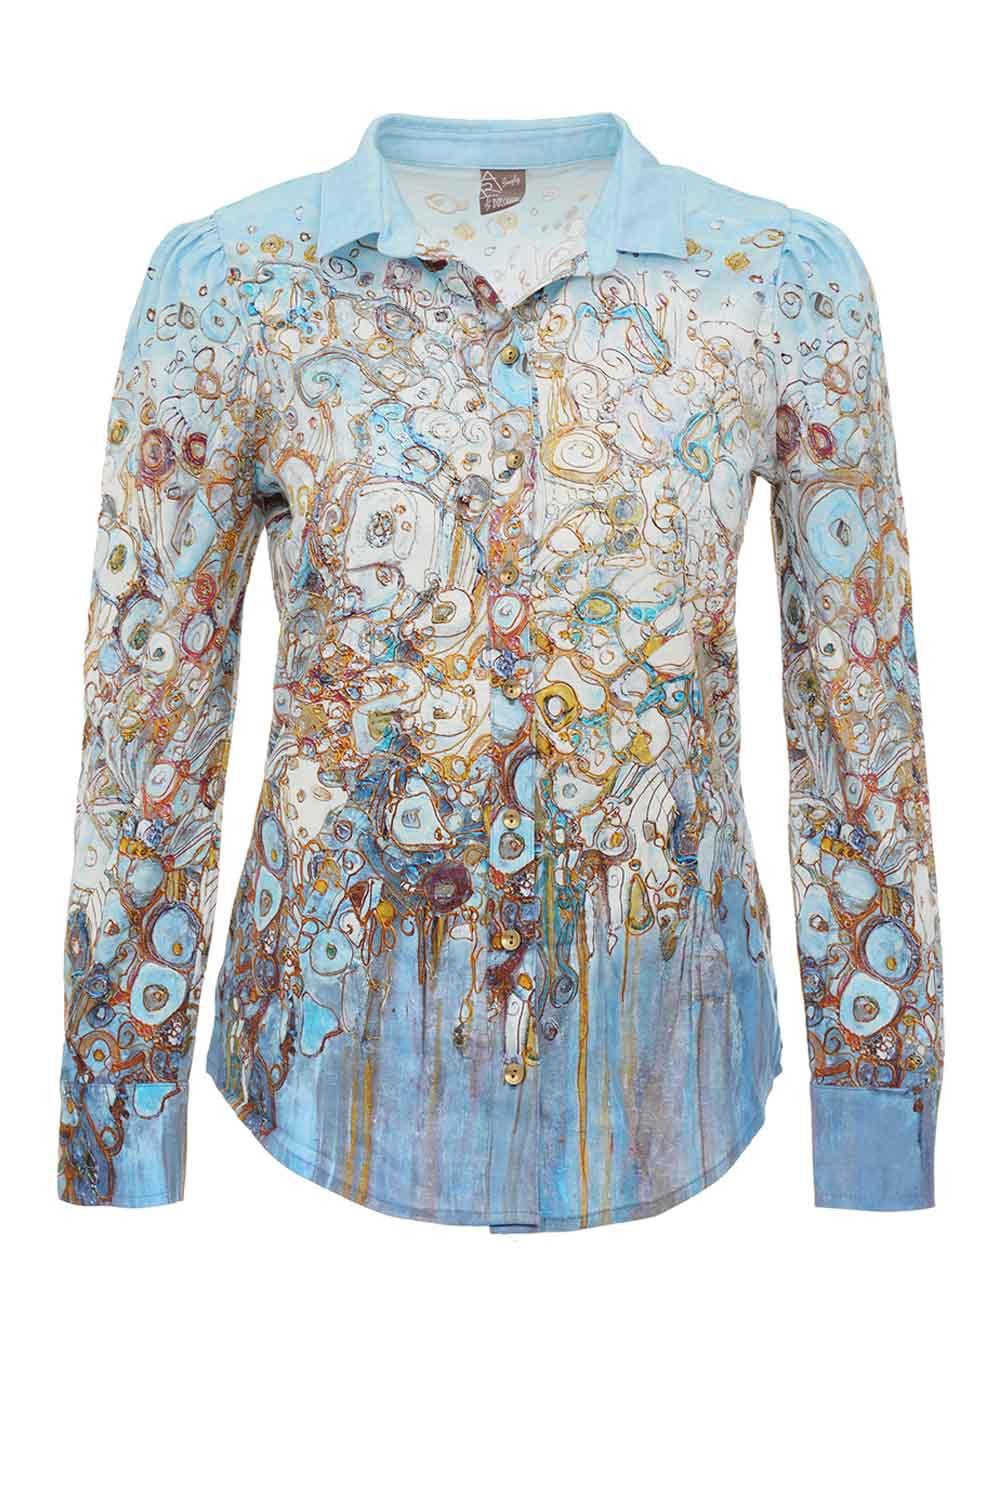 Dolcezza Shirt - Style 72605 - AW22, Multi Coloured, New, Print, Shirt, Taupe, Top ginasmartboutique